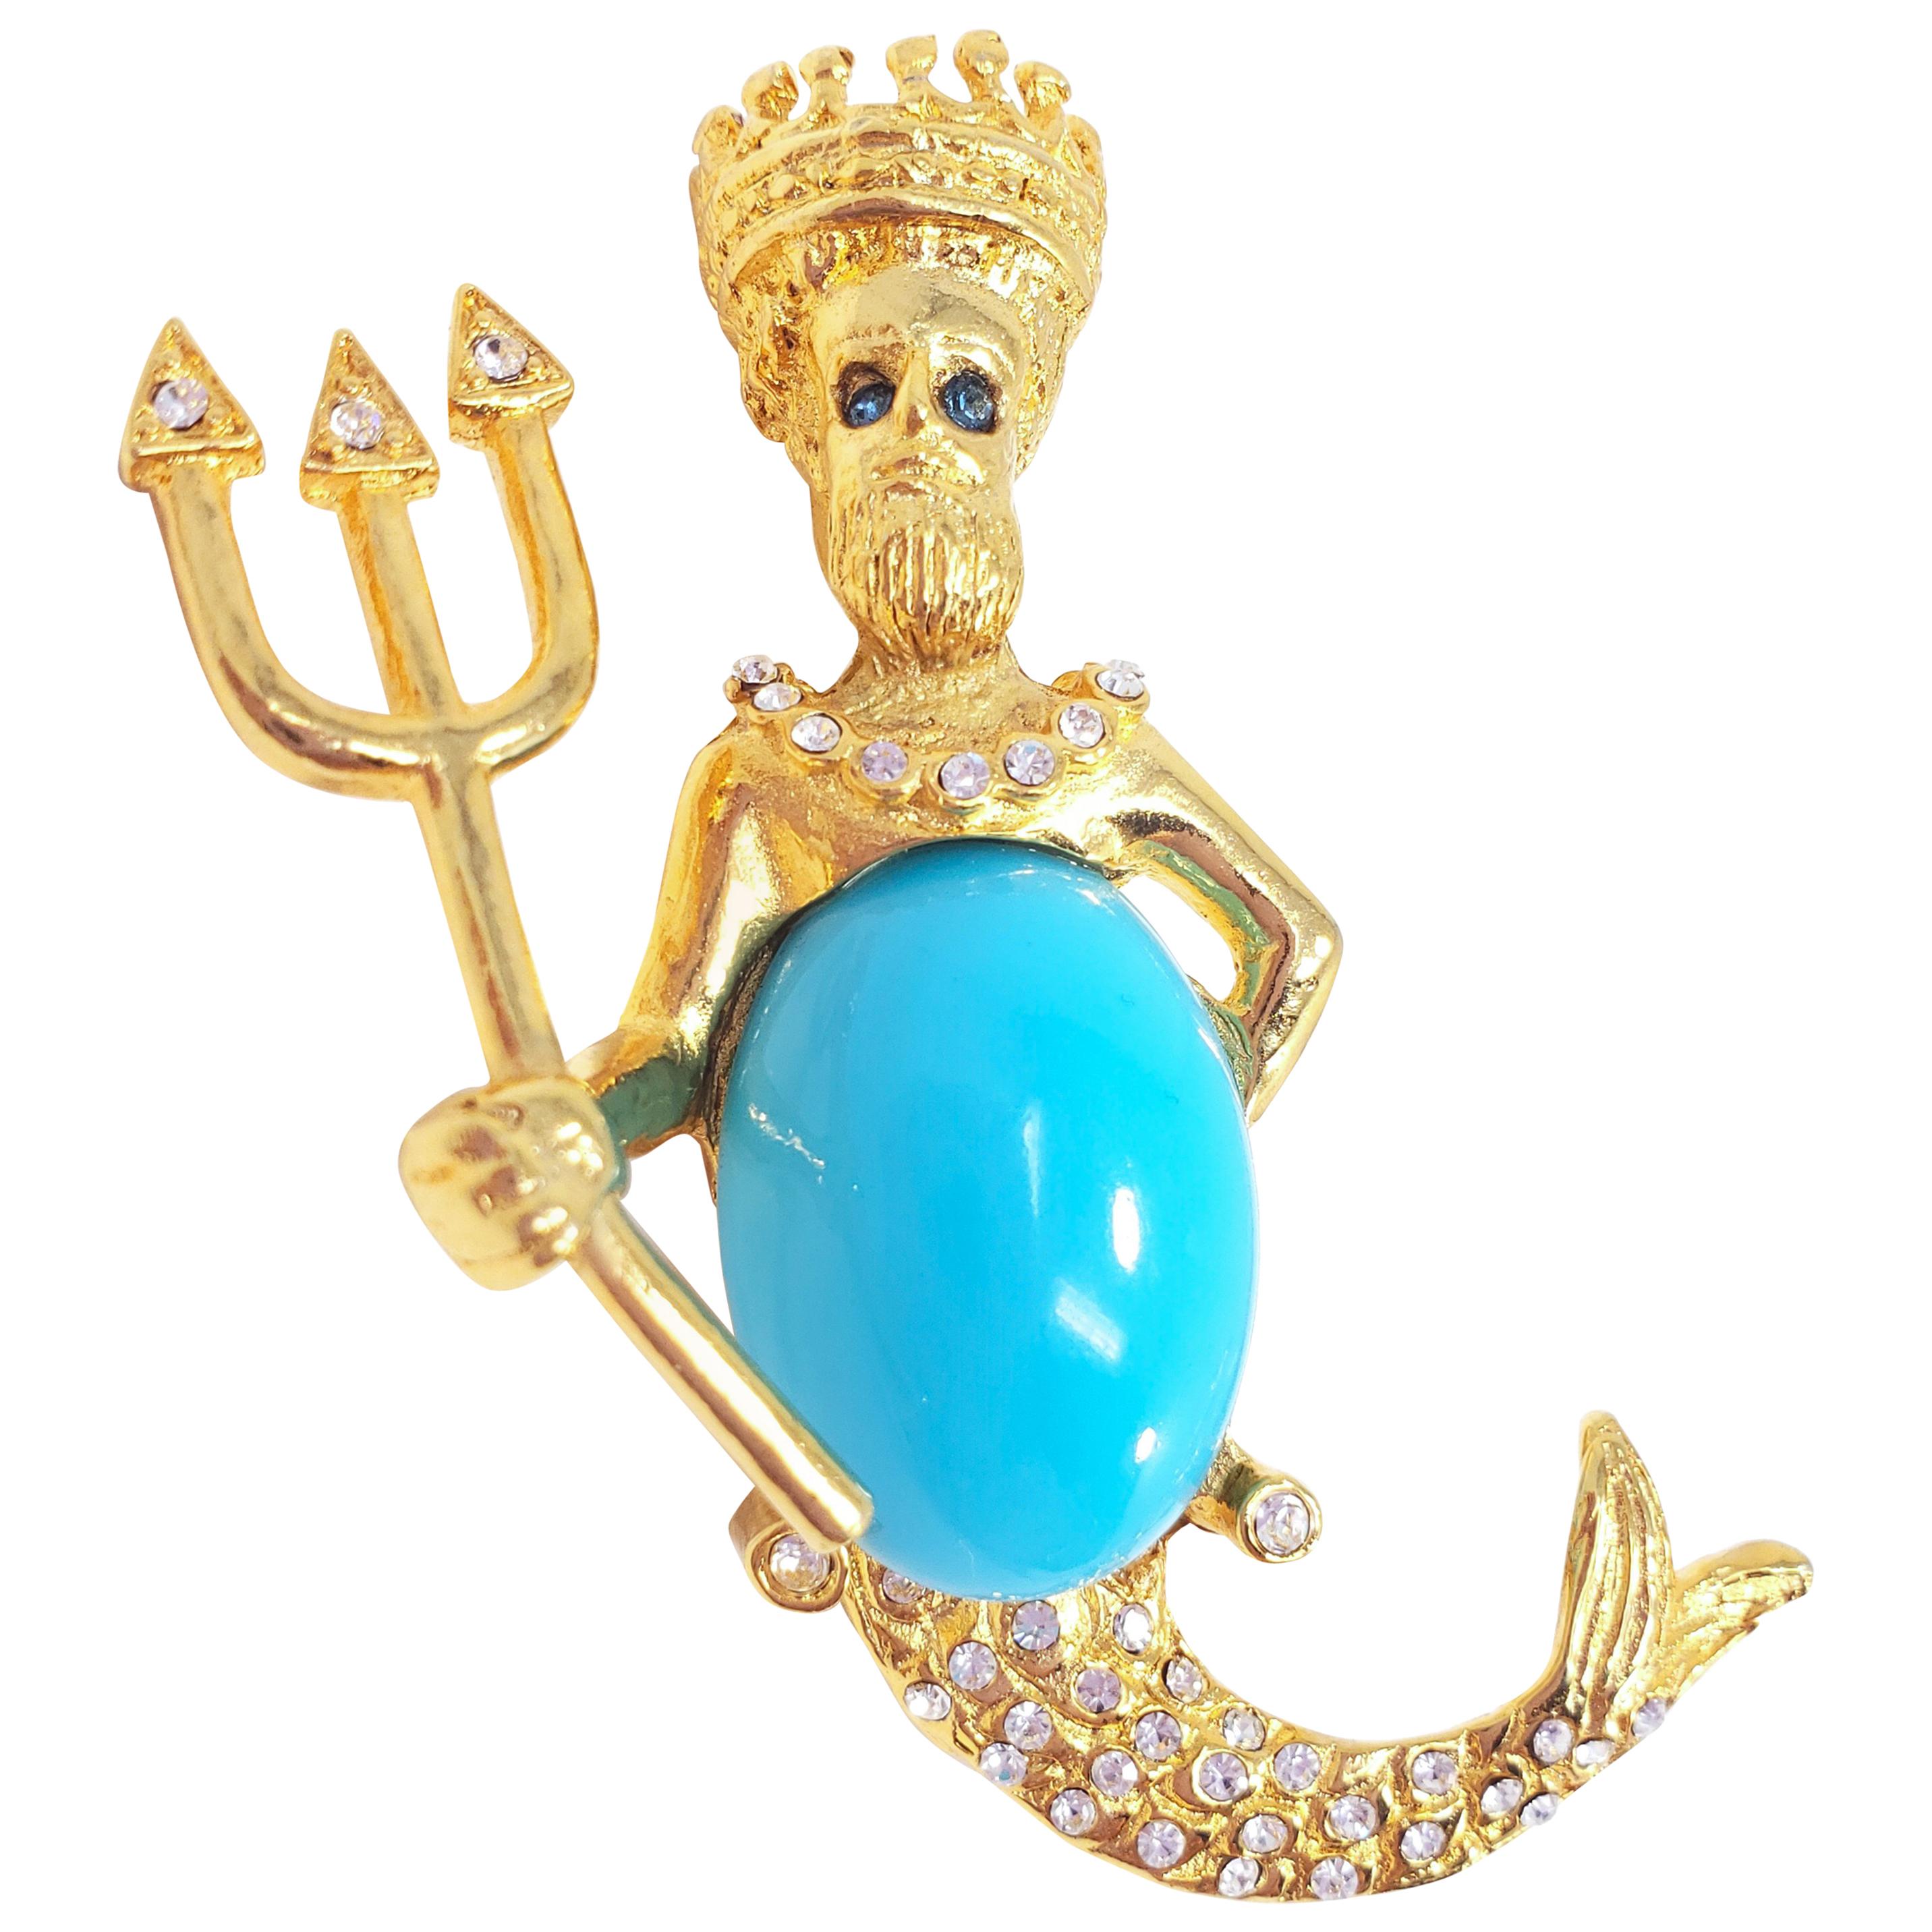 KJL Kenneth Jay Lane Poseidon Crystal and Turquoise Cabochon Goldtone Brooch Pin